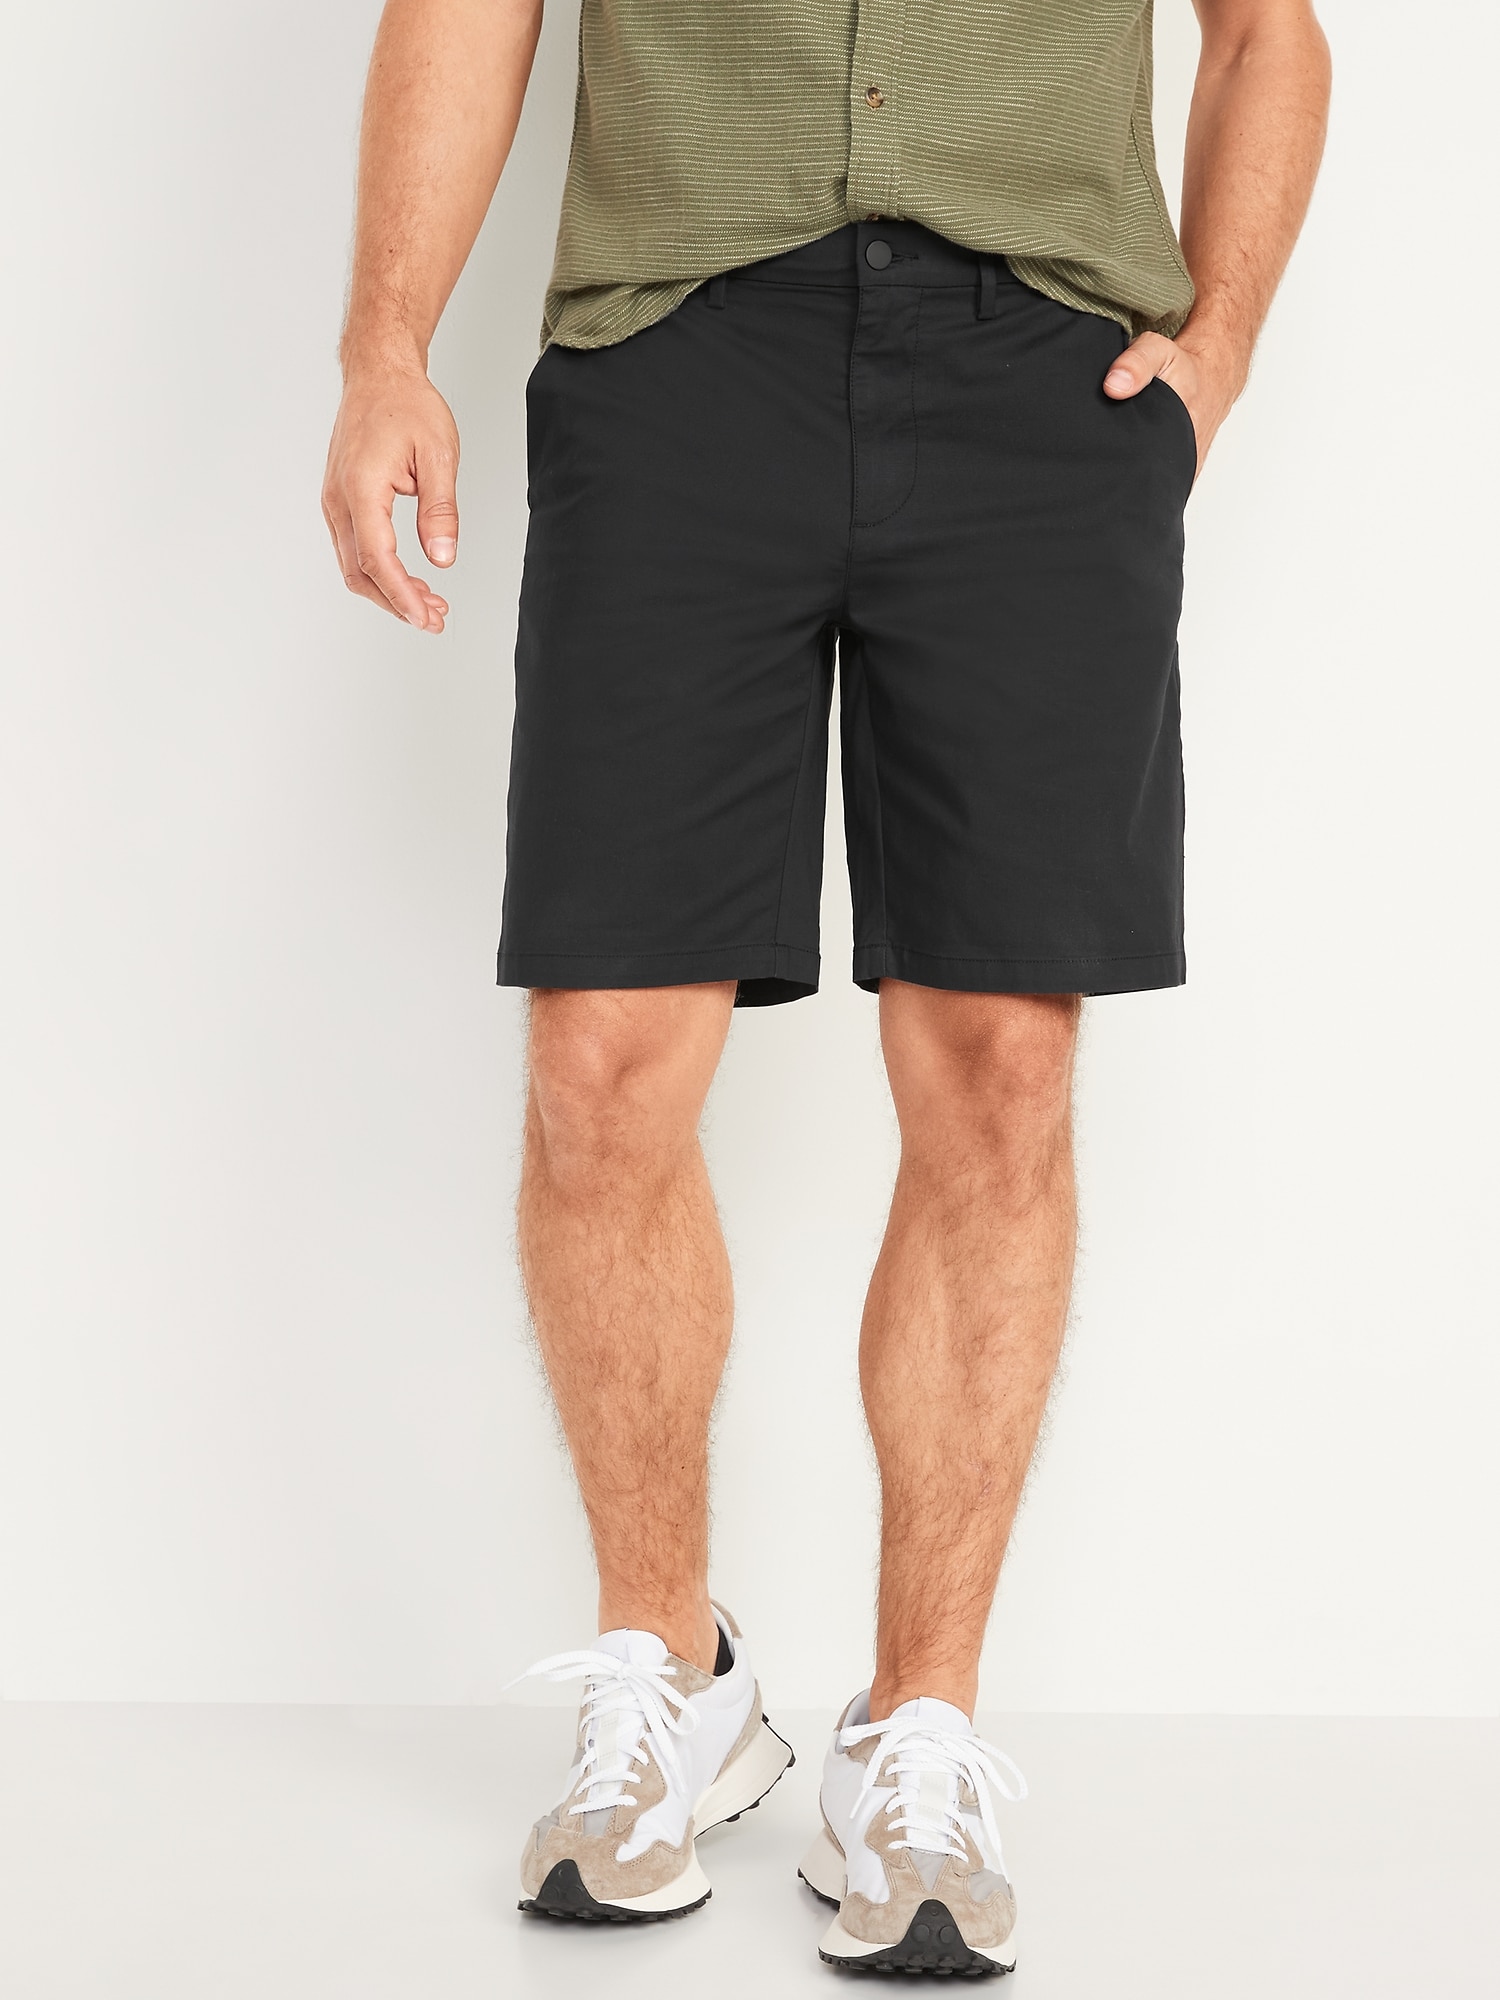 Old Navy Men's Slim Built-in Flex Ultimate Chino Shorts -- 7-Inch Inseam - - Tall Size 38W